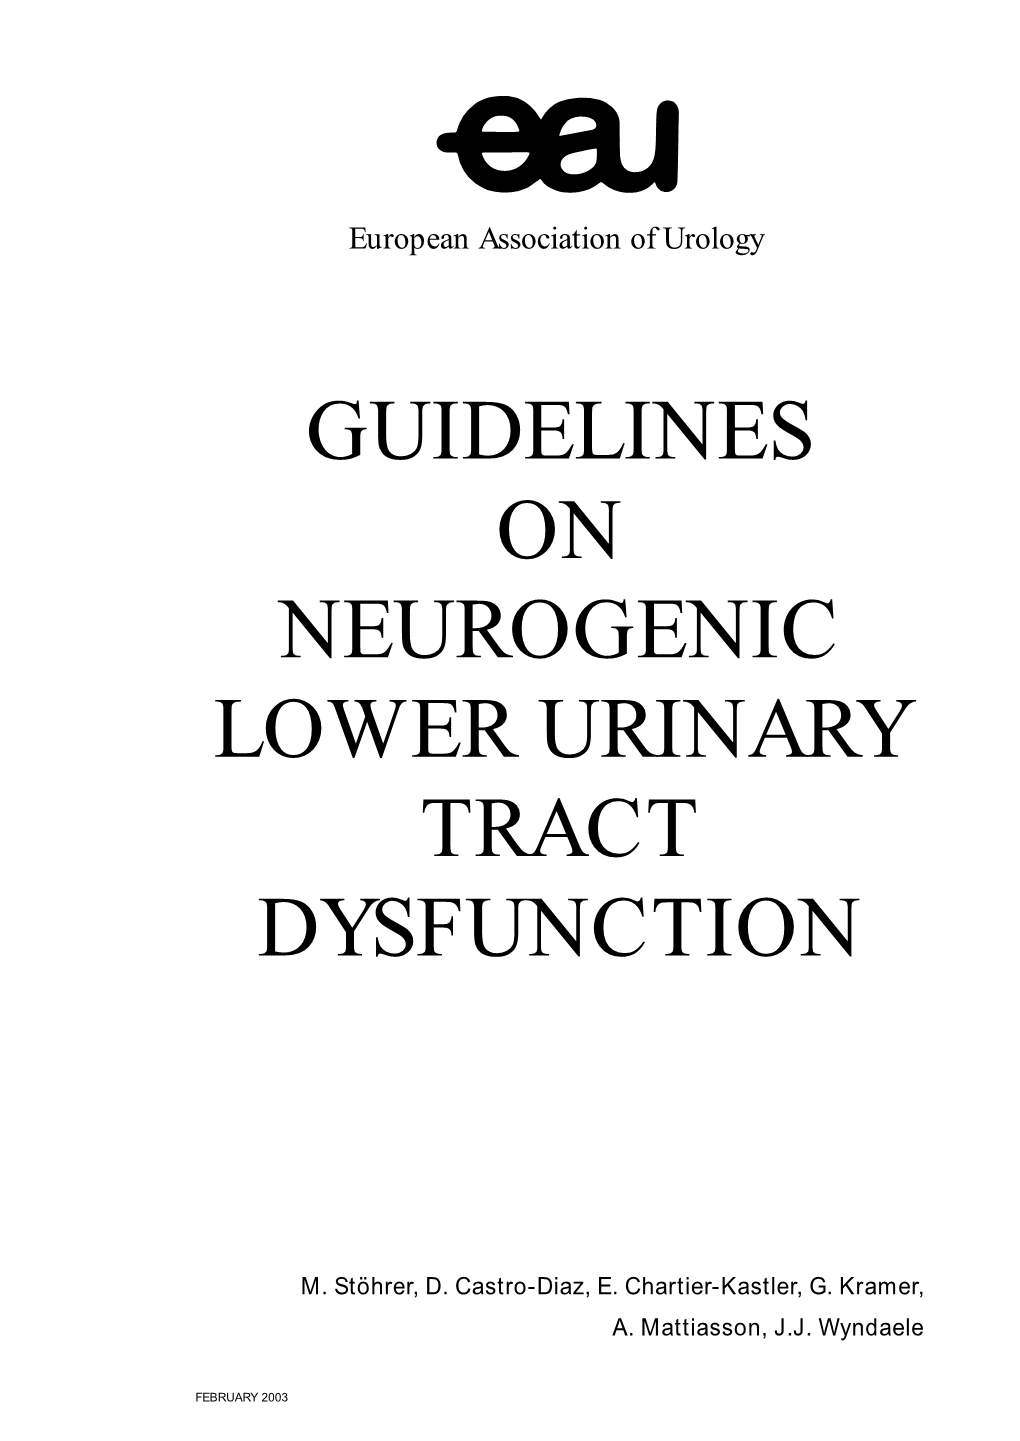 Guidelines on Neurogenic Lower Urinary Tract Dysfunction